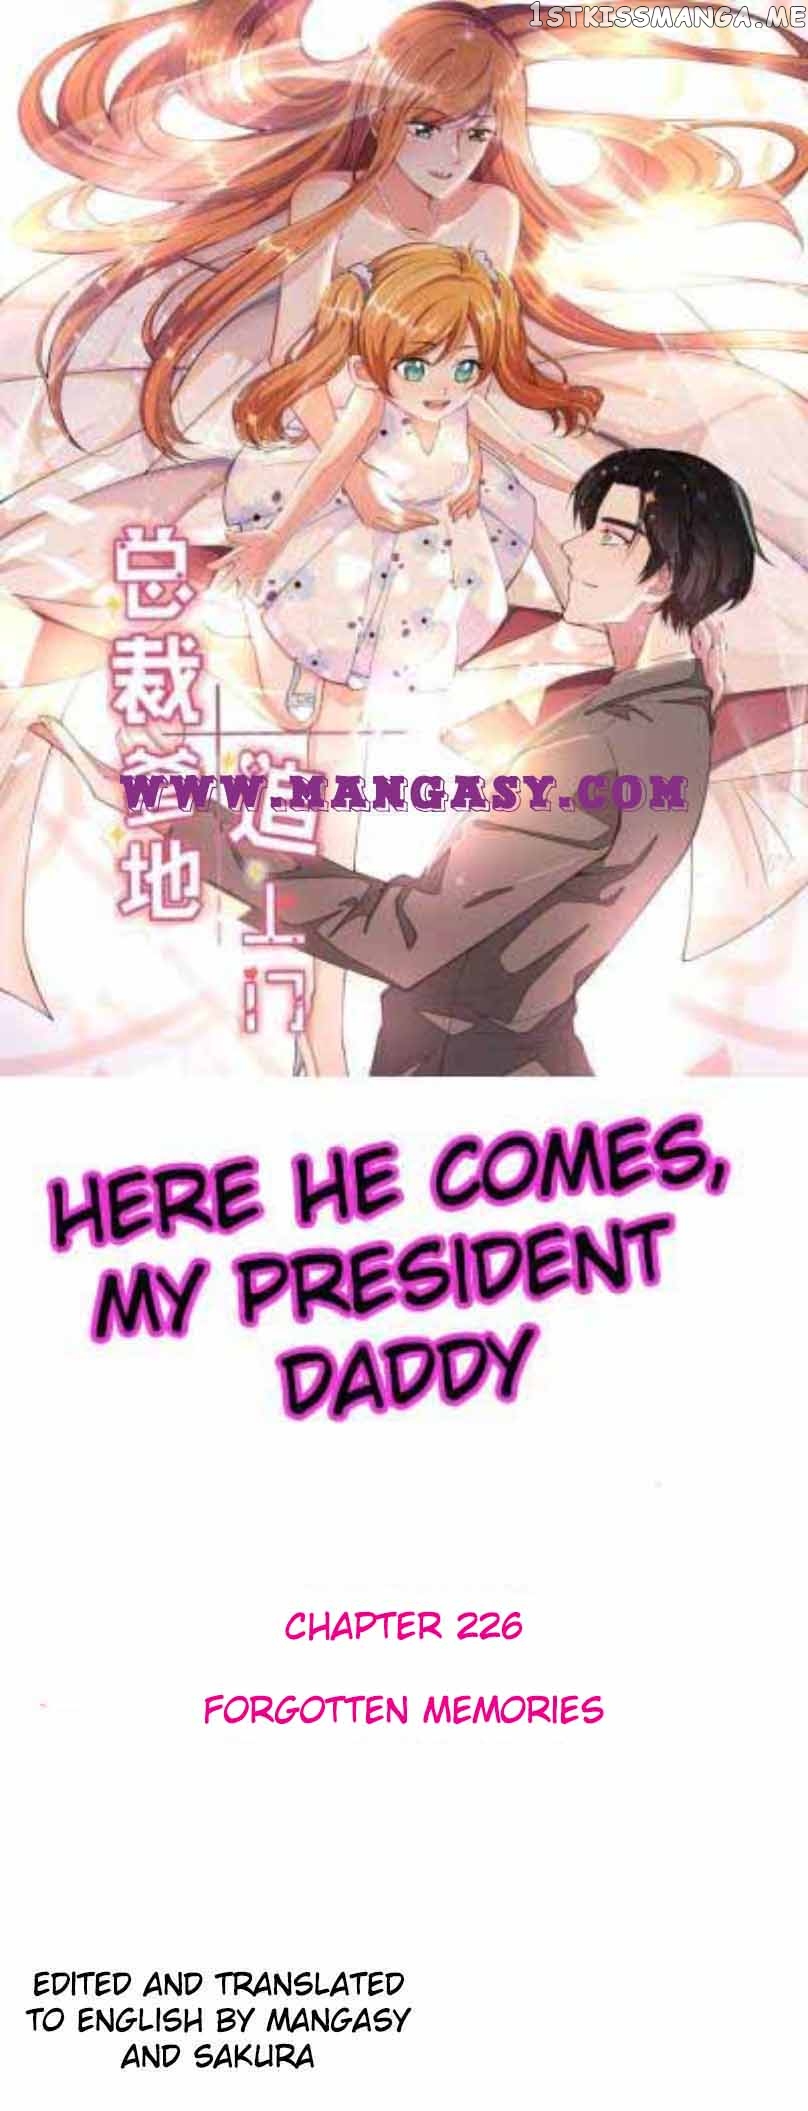 President daddy is chasing you Chapter 226 - page 1